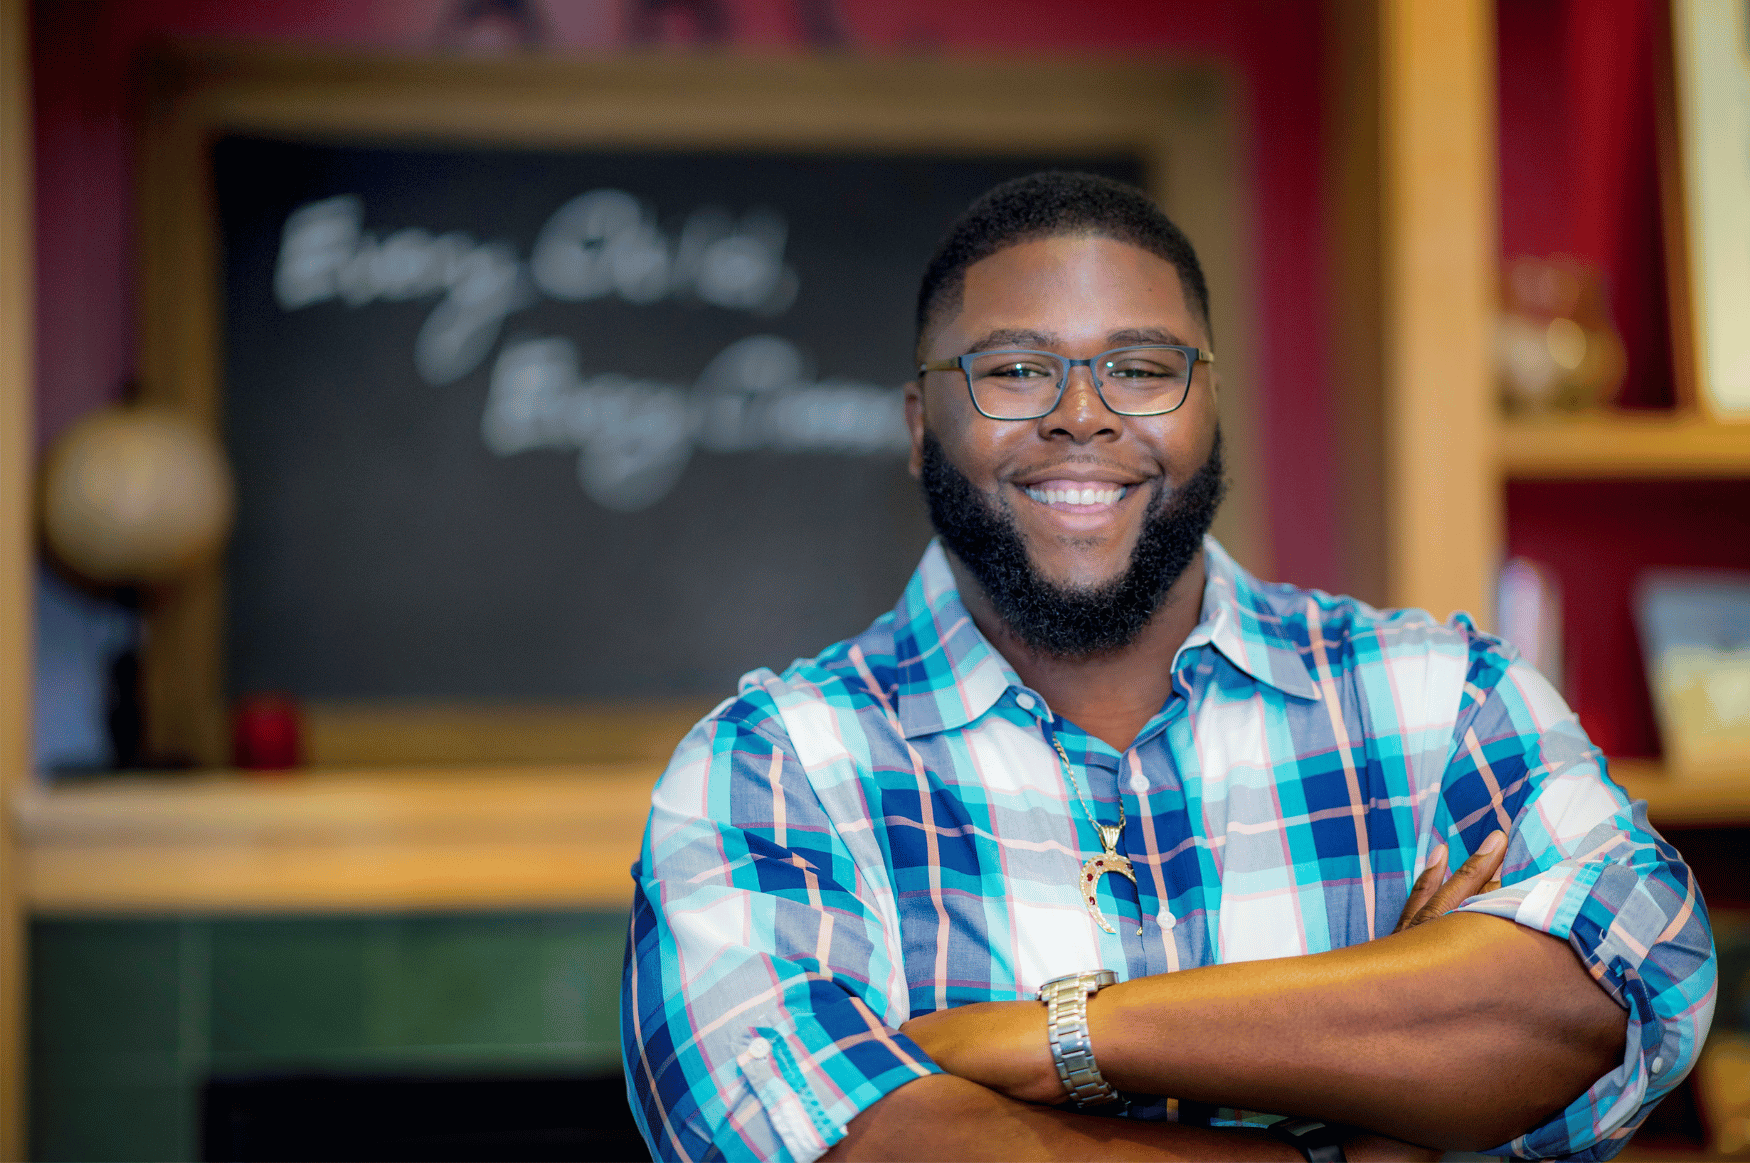 Anthony Jack smiles with crossed arms in front of an out-of-focus chalkboard.